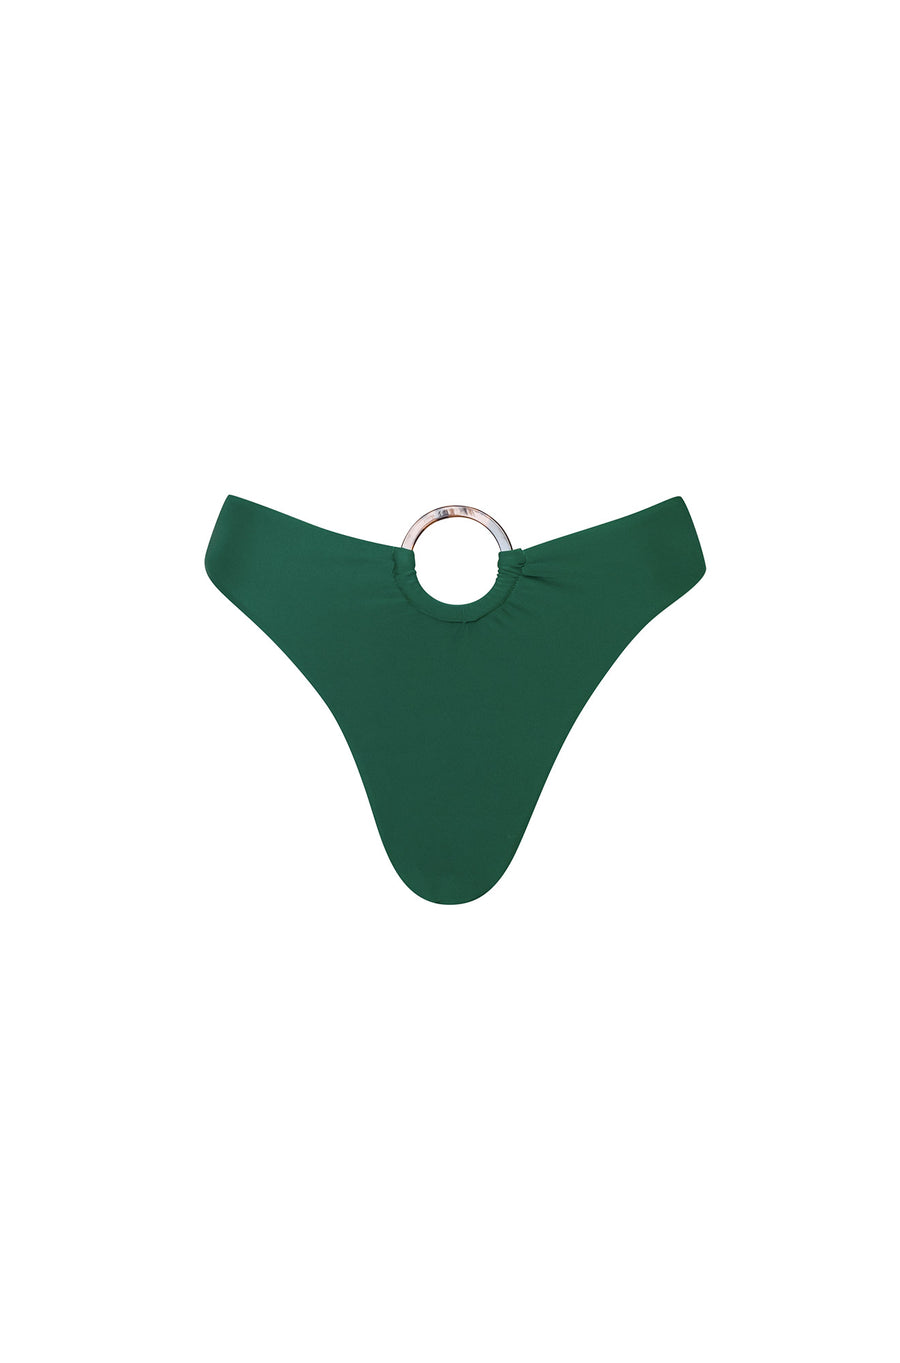 Vintage style green bikini bottom, fitted with tortoise hoop made from plastic resin.